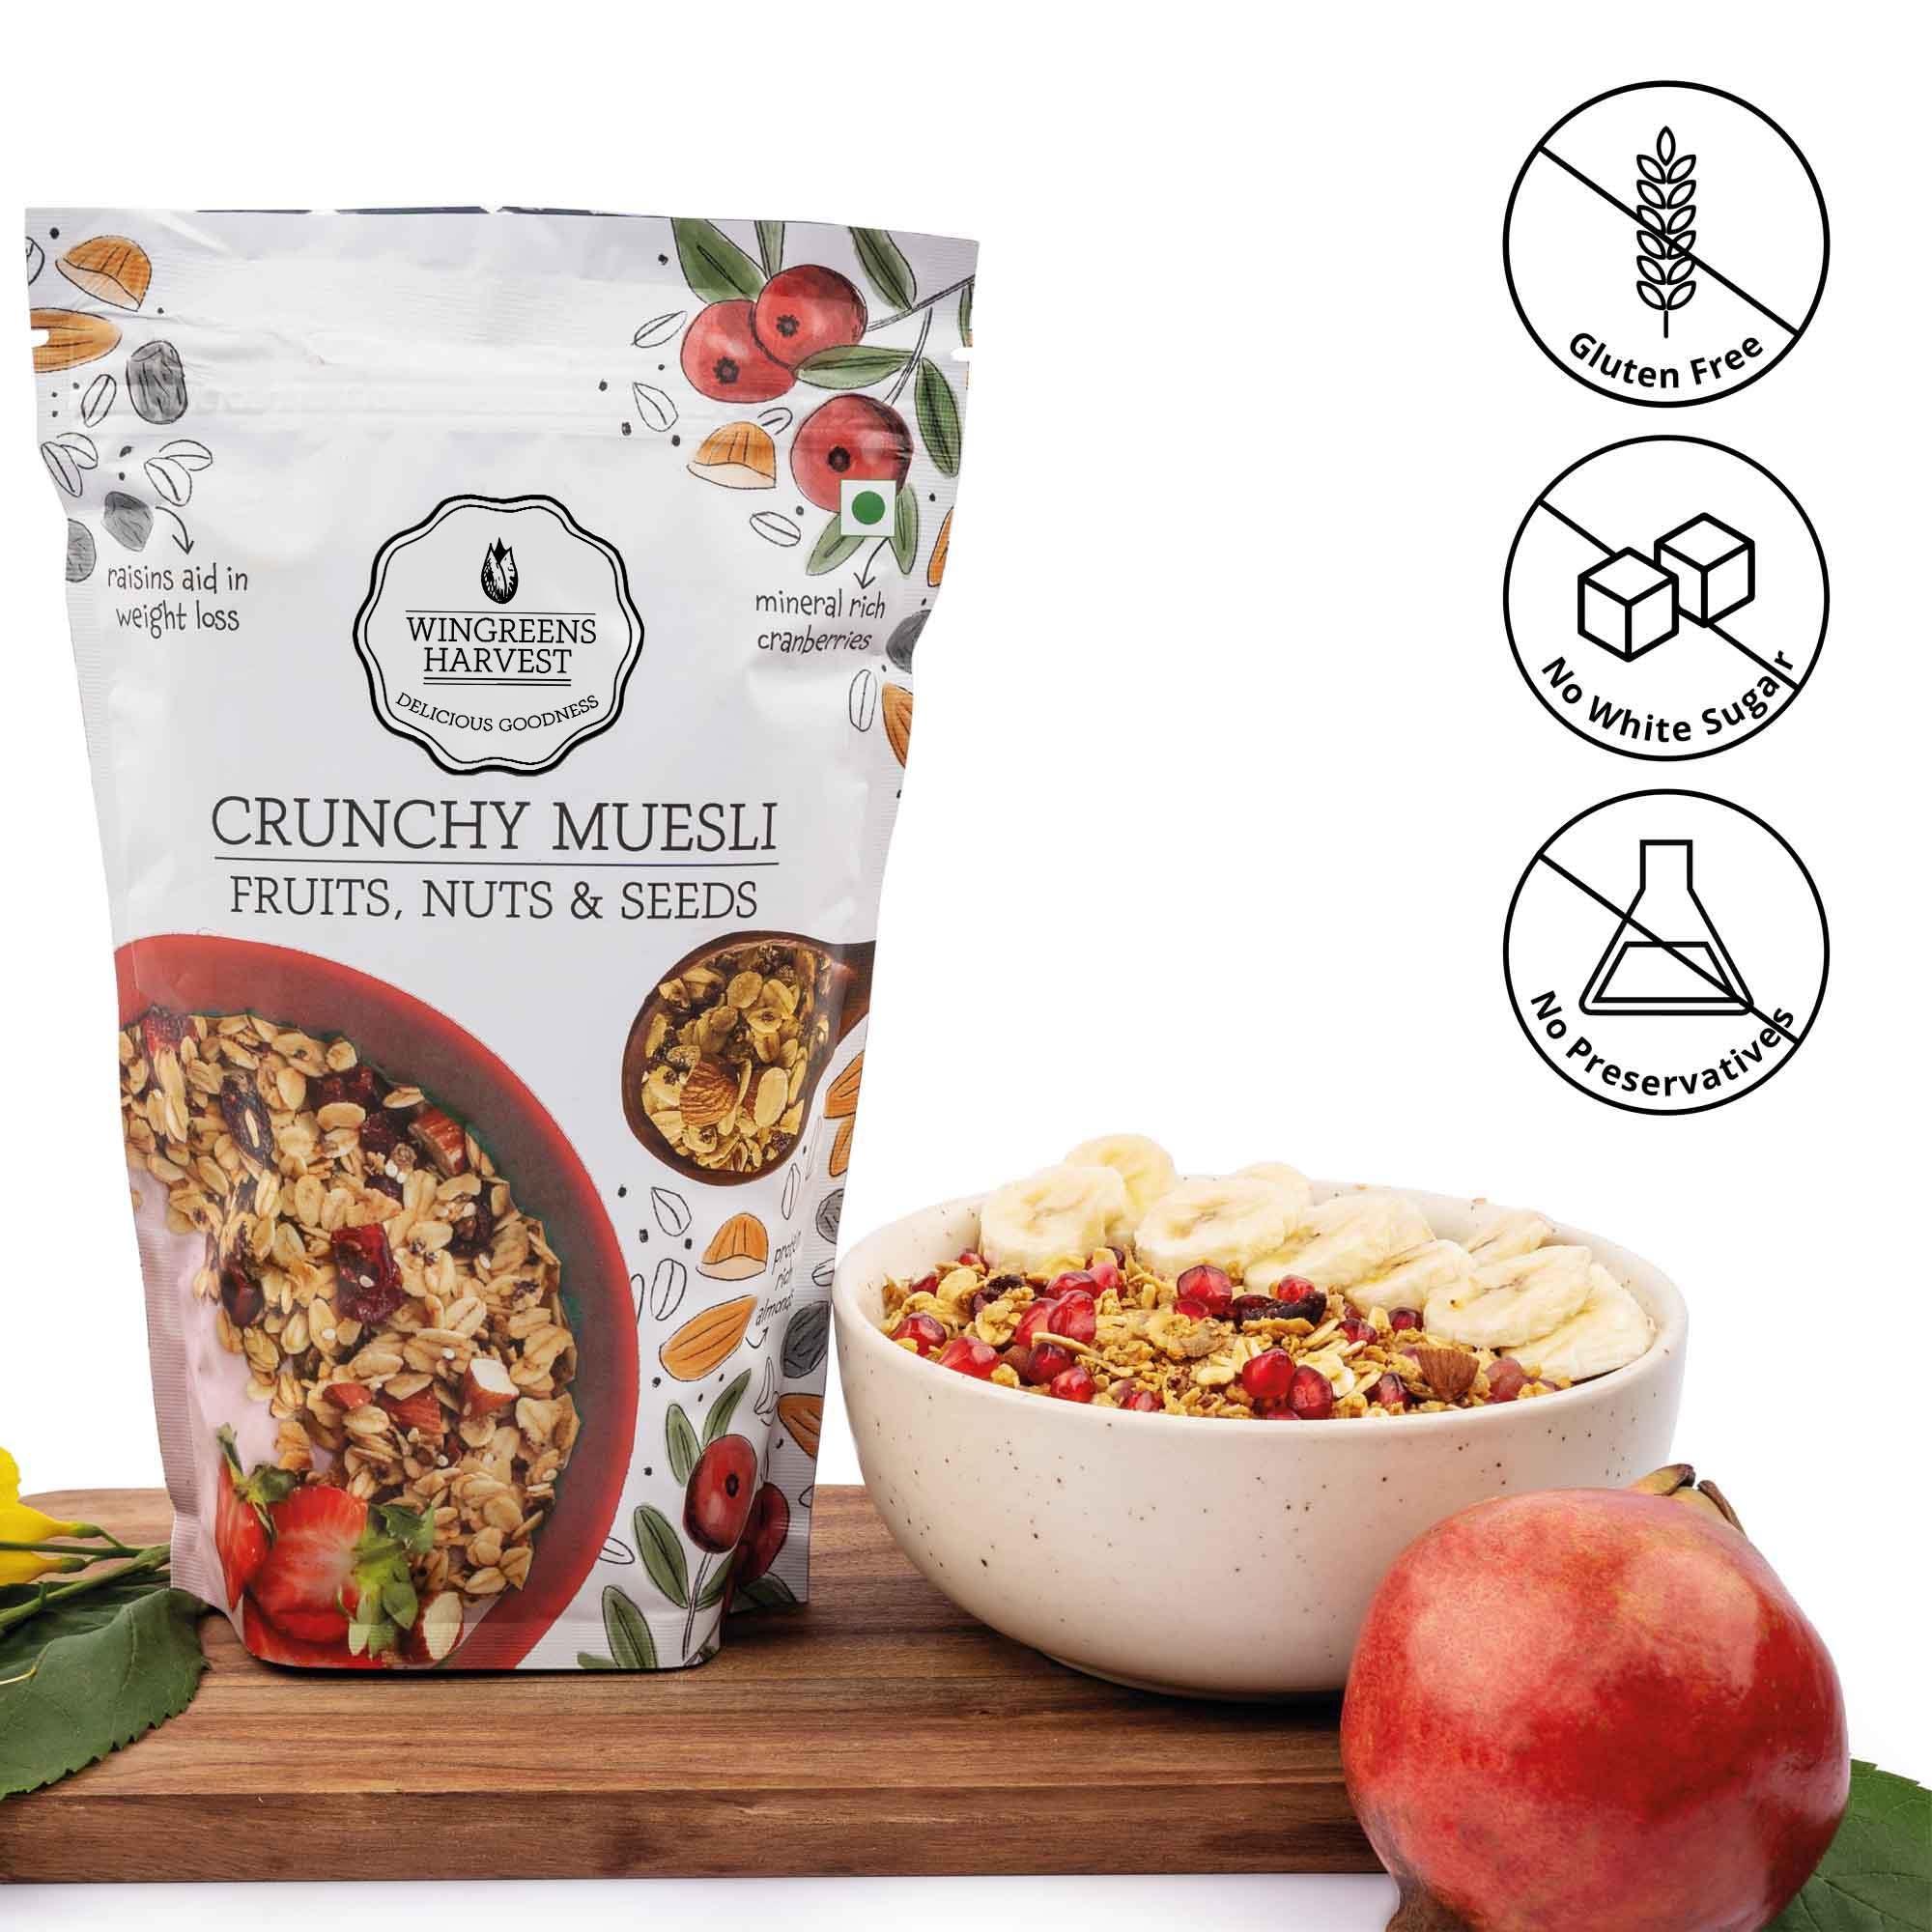 Crunchy Muesli - Fruits, Nuts and Seeds, 2 x 200g